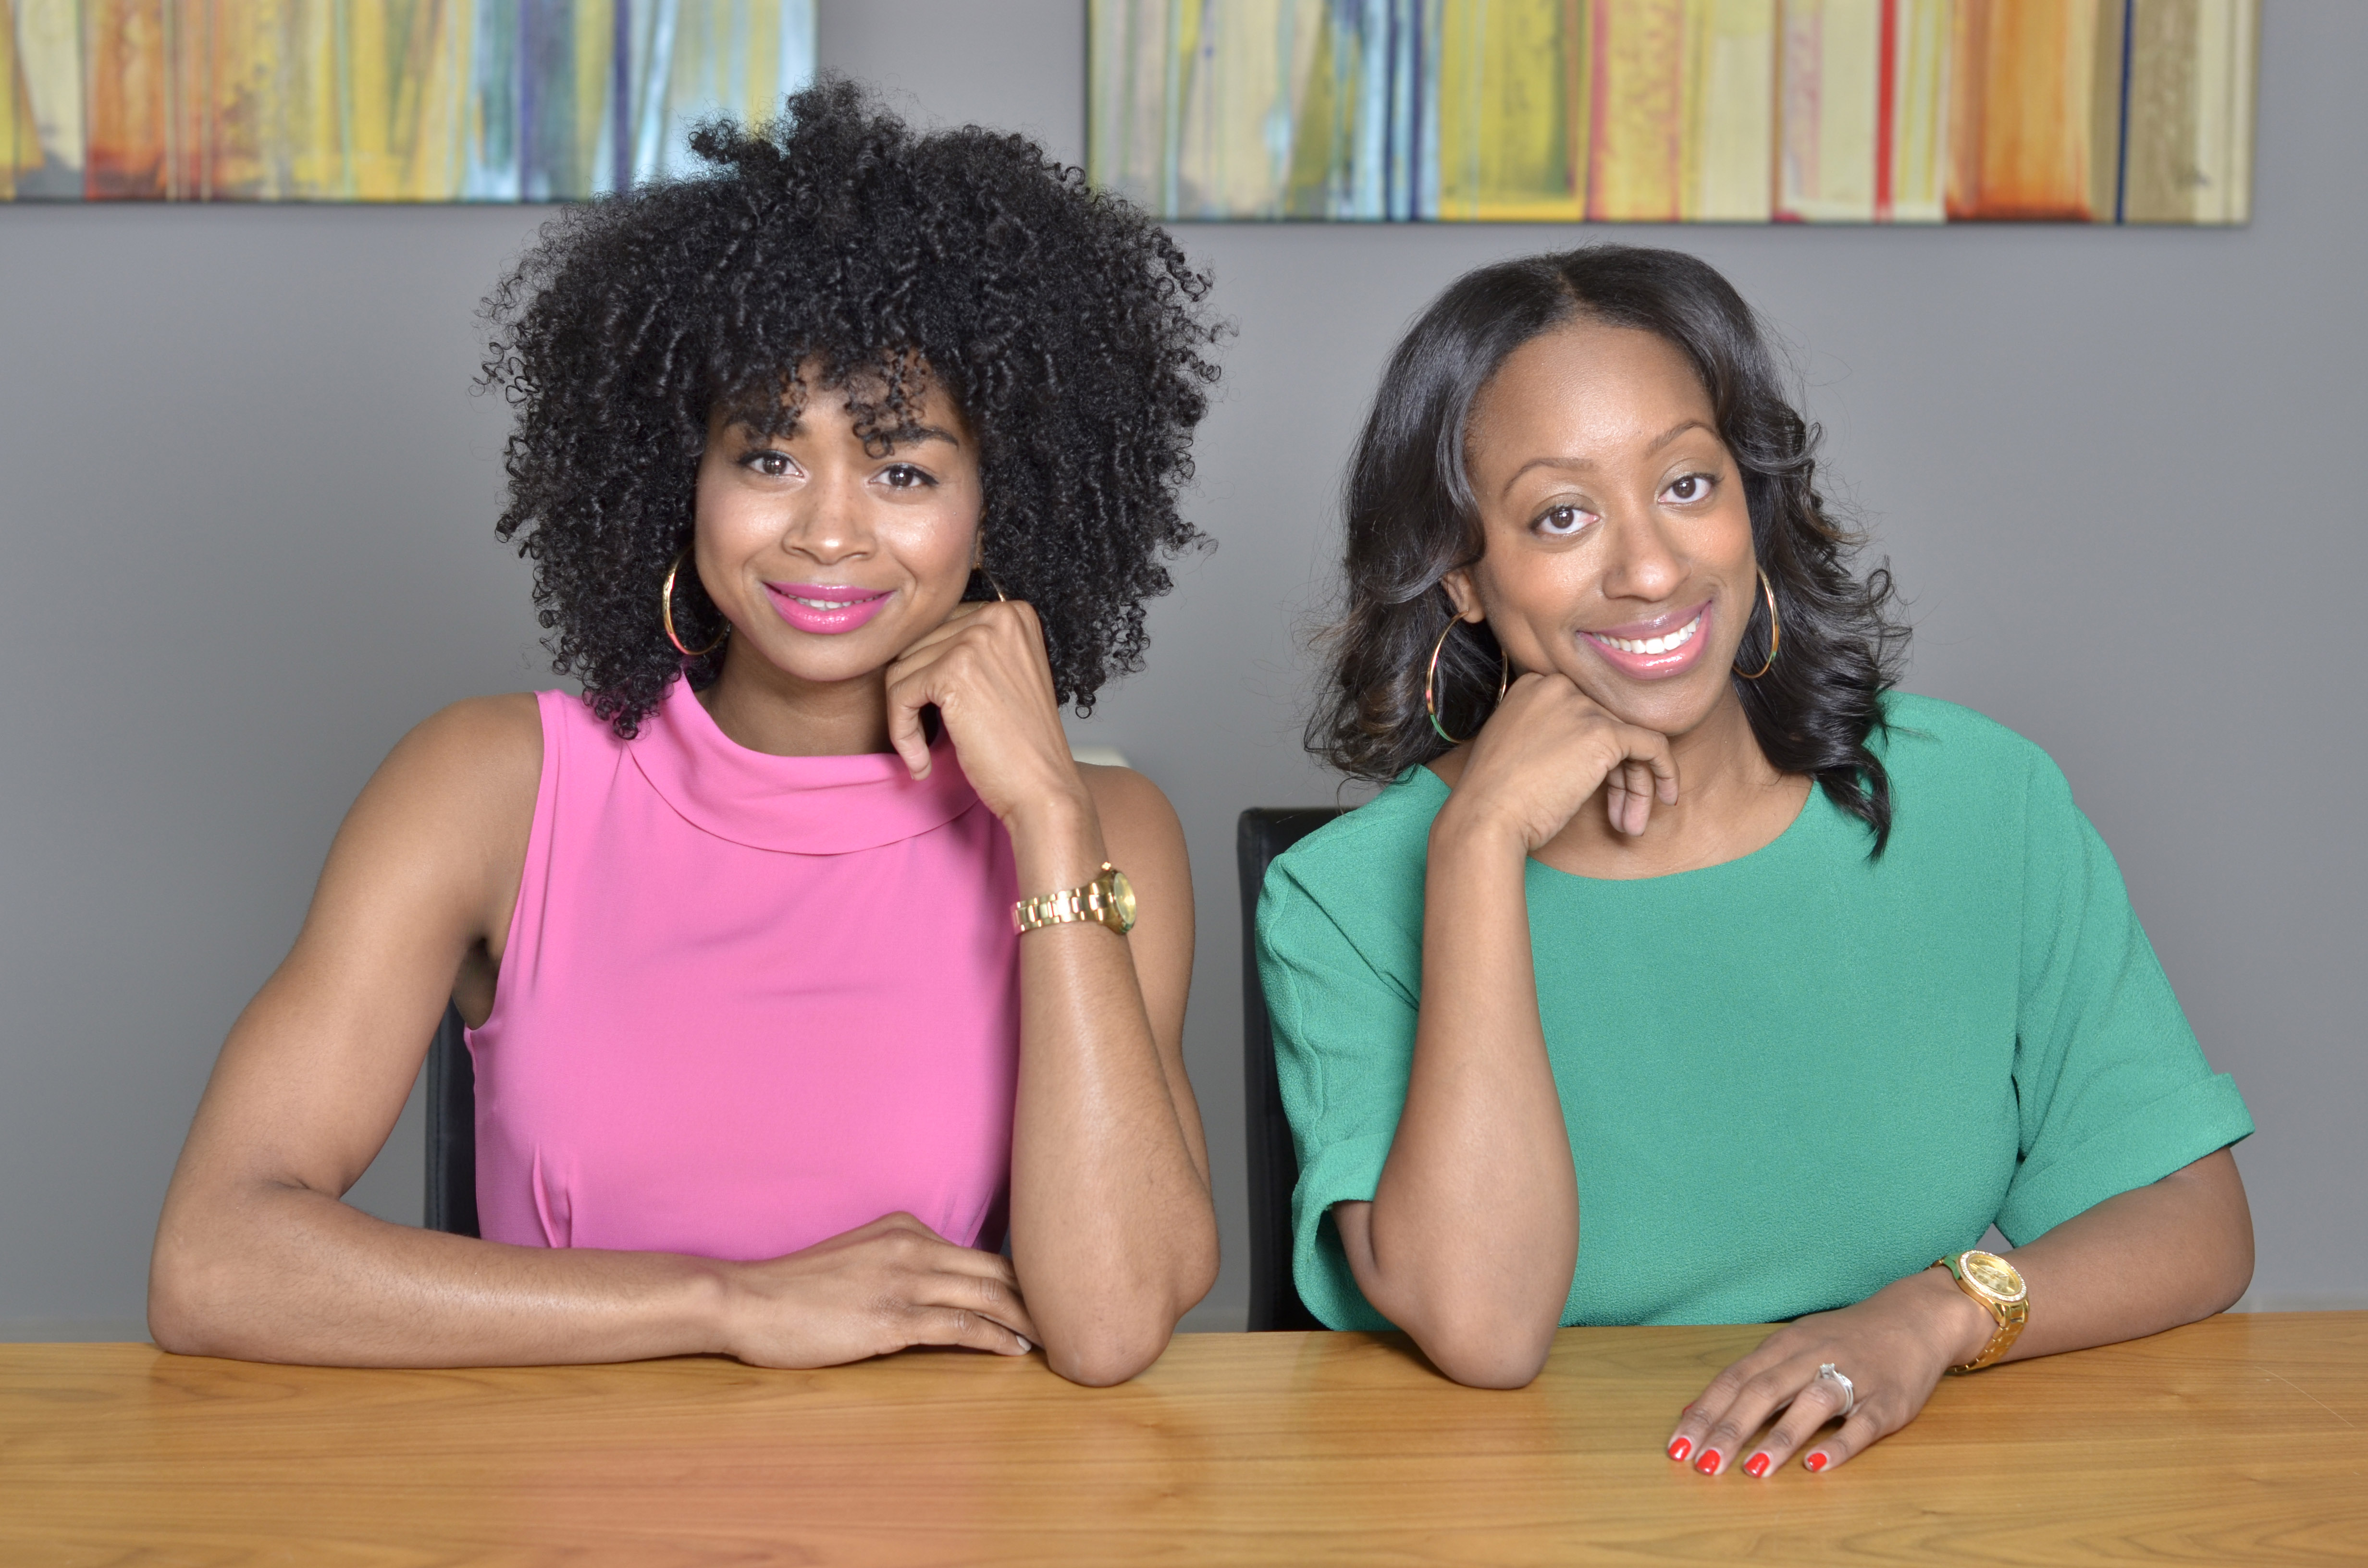 Ariel Harris Roberson (lt.) is a business litigator and Amber Payton (rt.) is an organizational psychologist. They are located in North Carolina. 